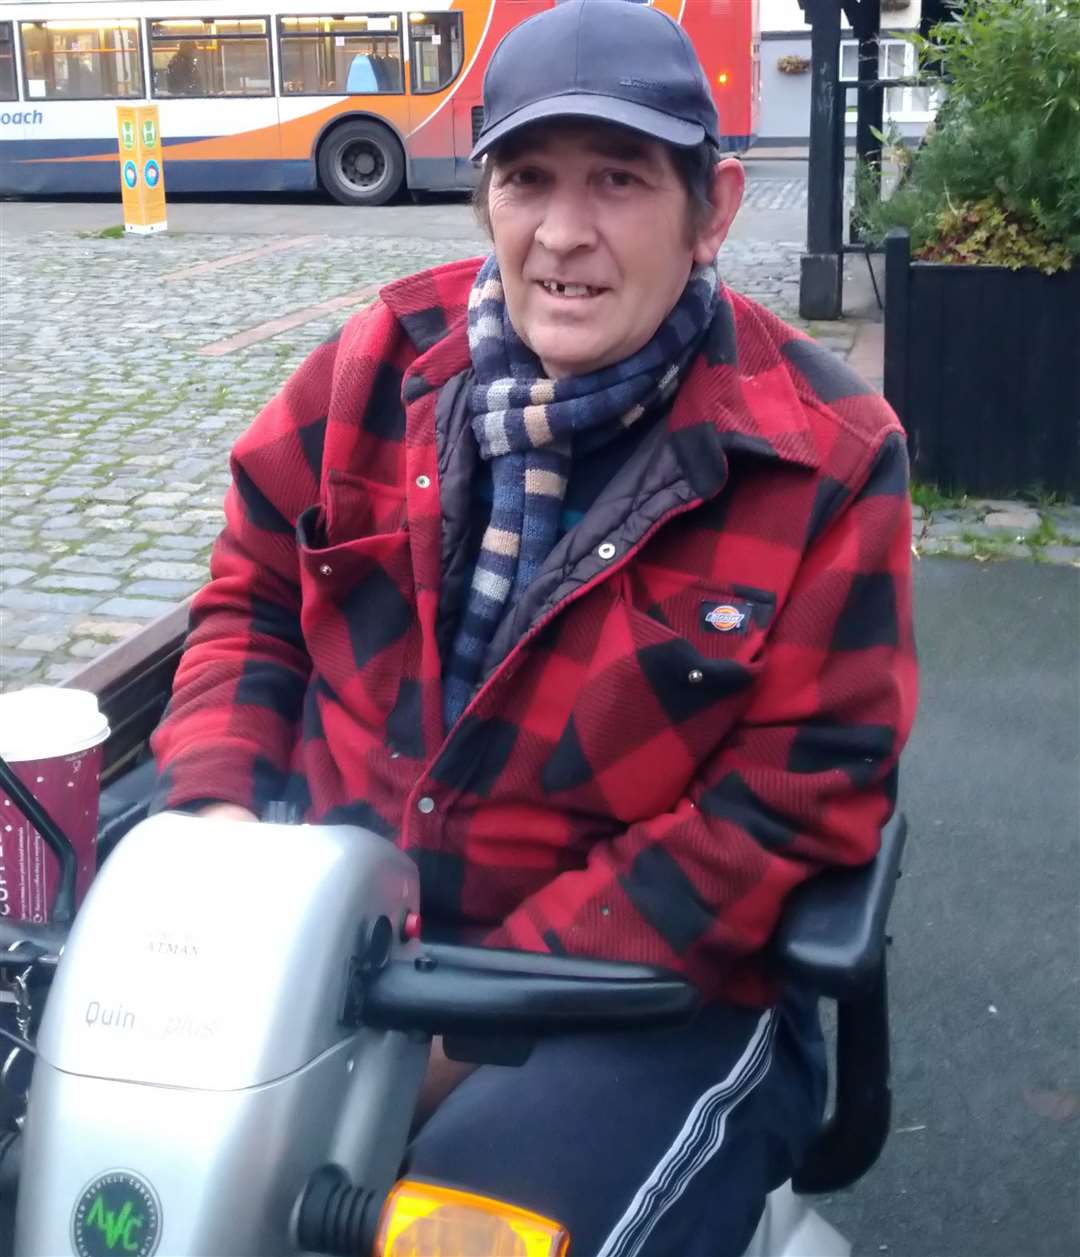 Chris King who had a stroke in 2016 now uses a mobility scooter